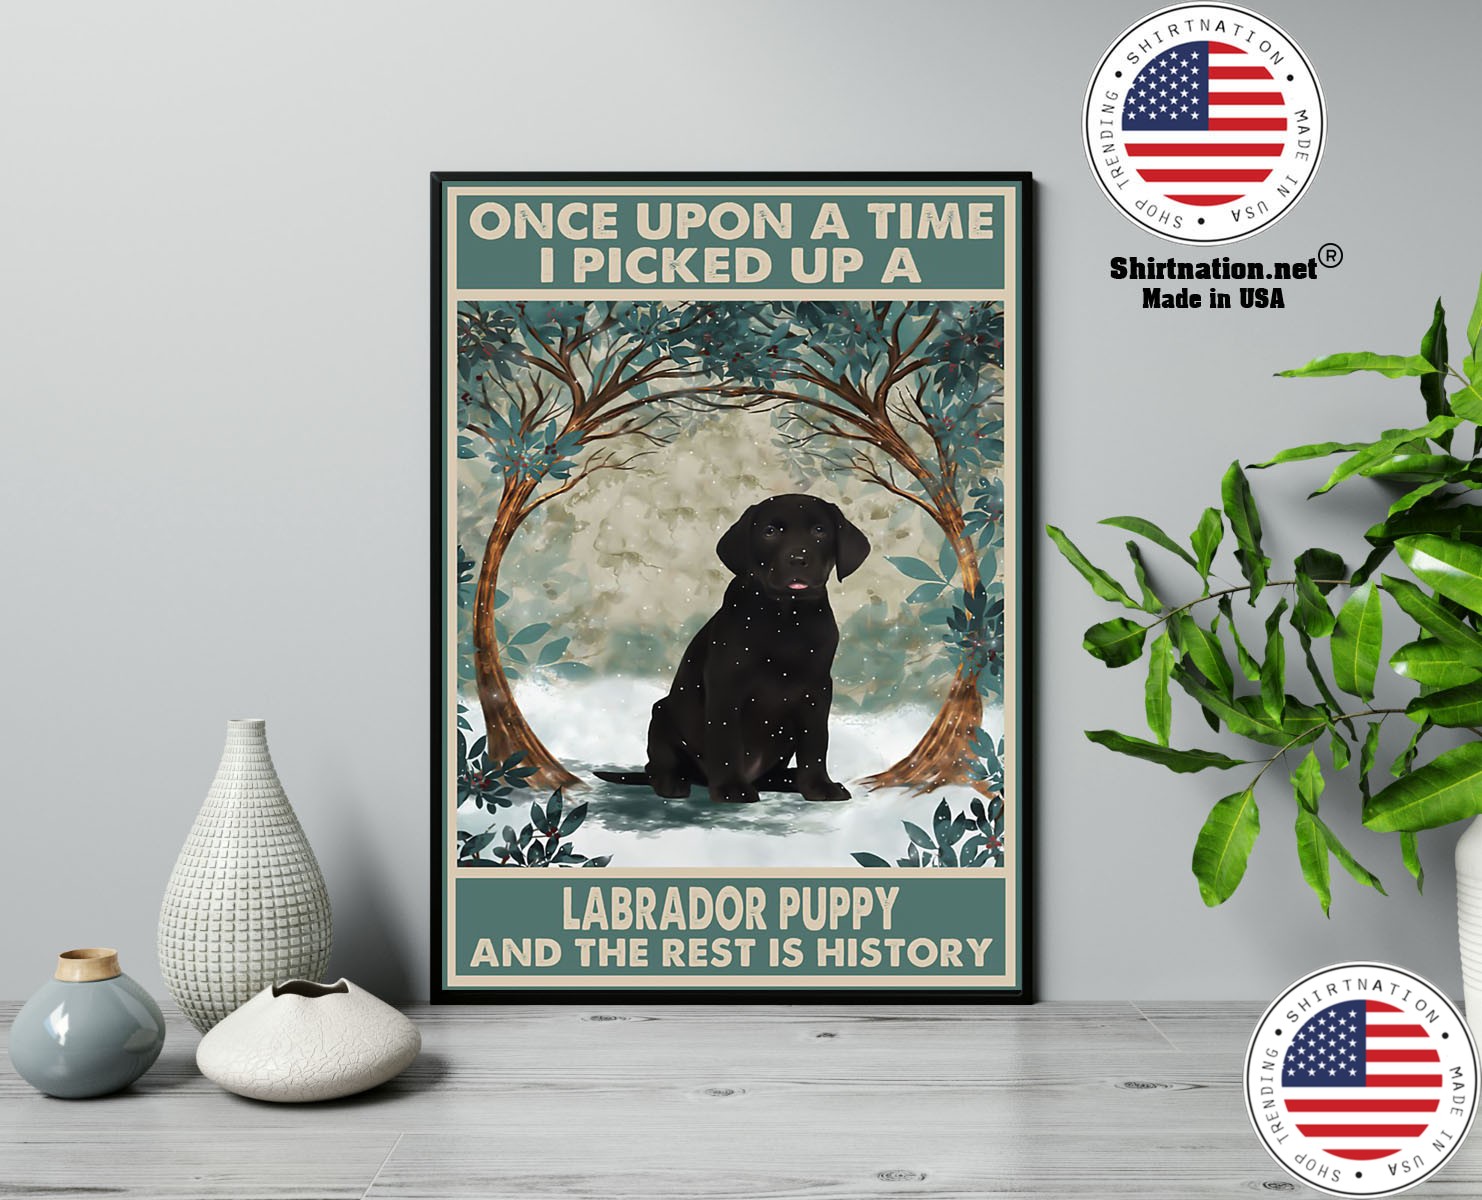 Once upon a time I picked up a labrador puppy and the rest is history poster 13